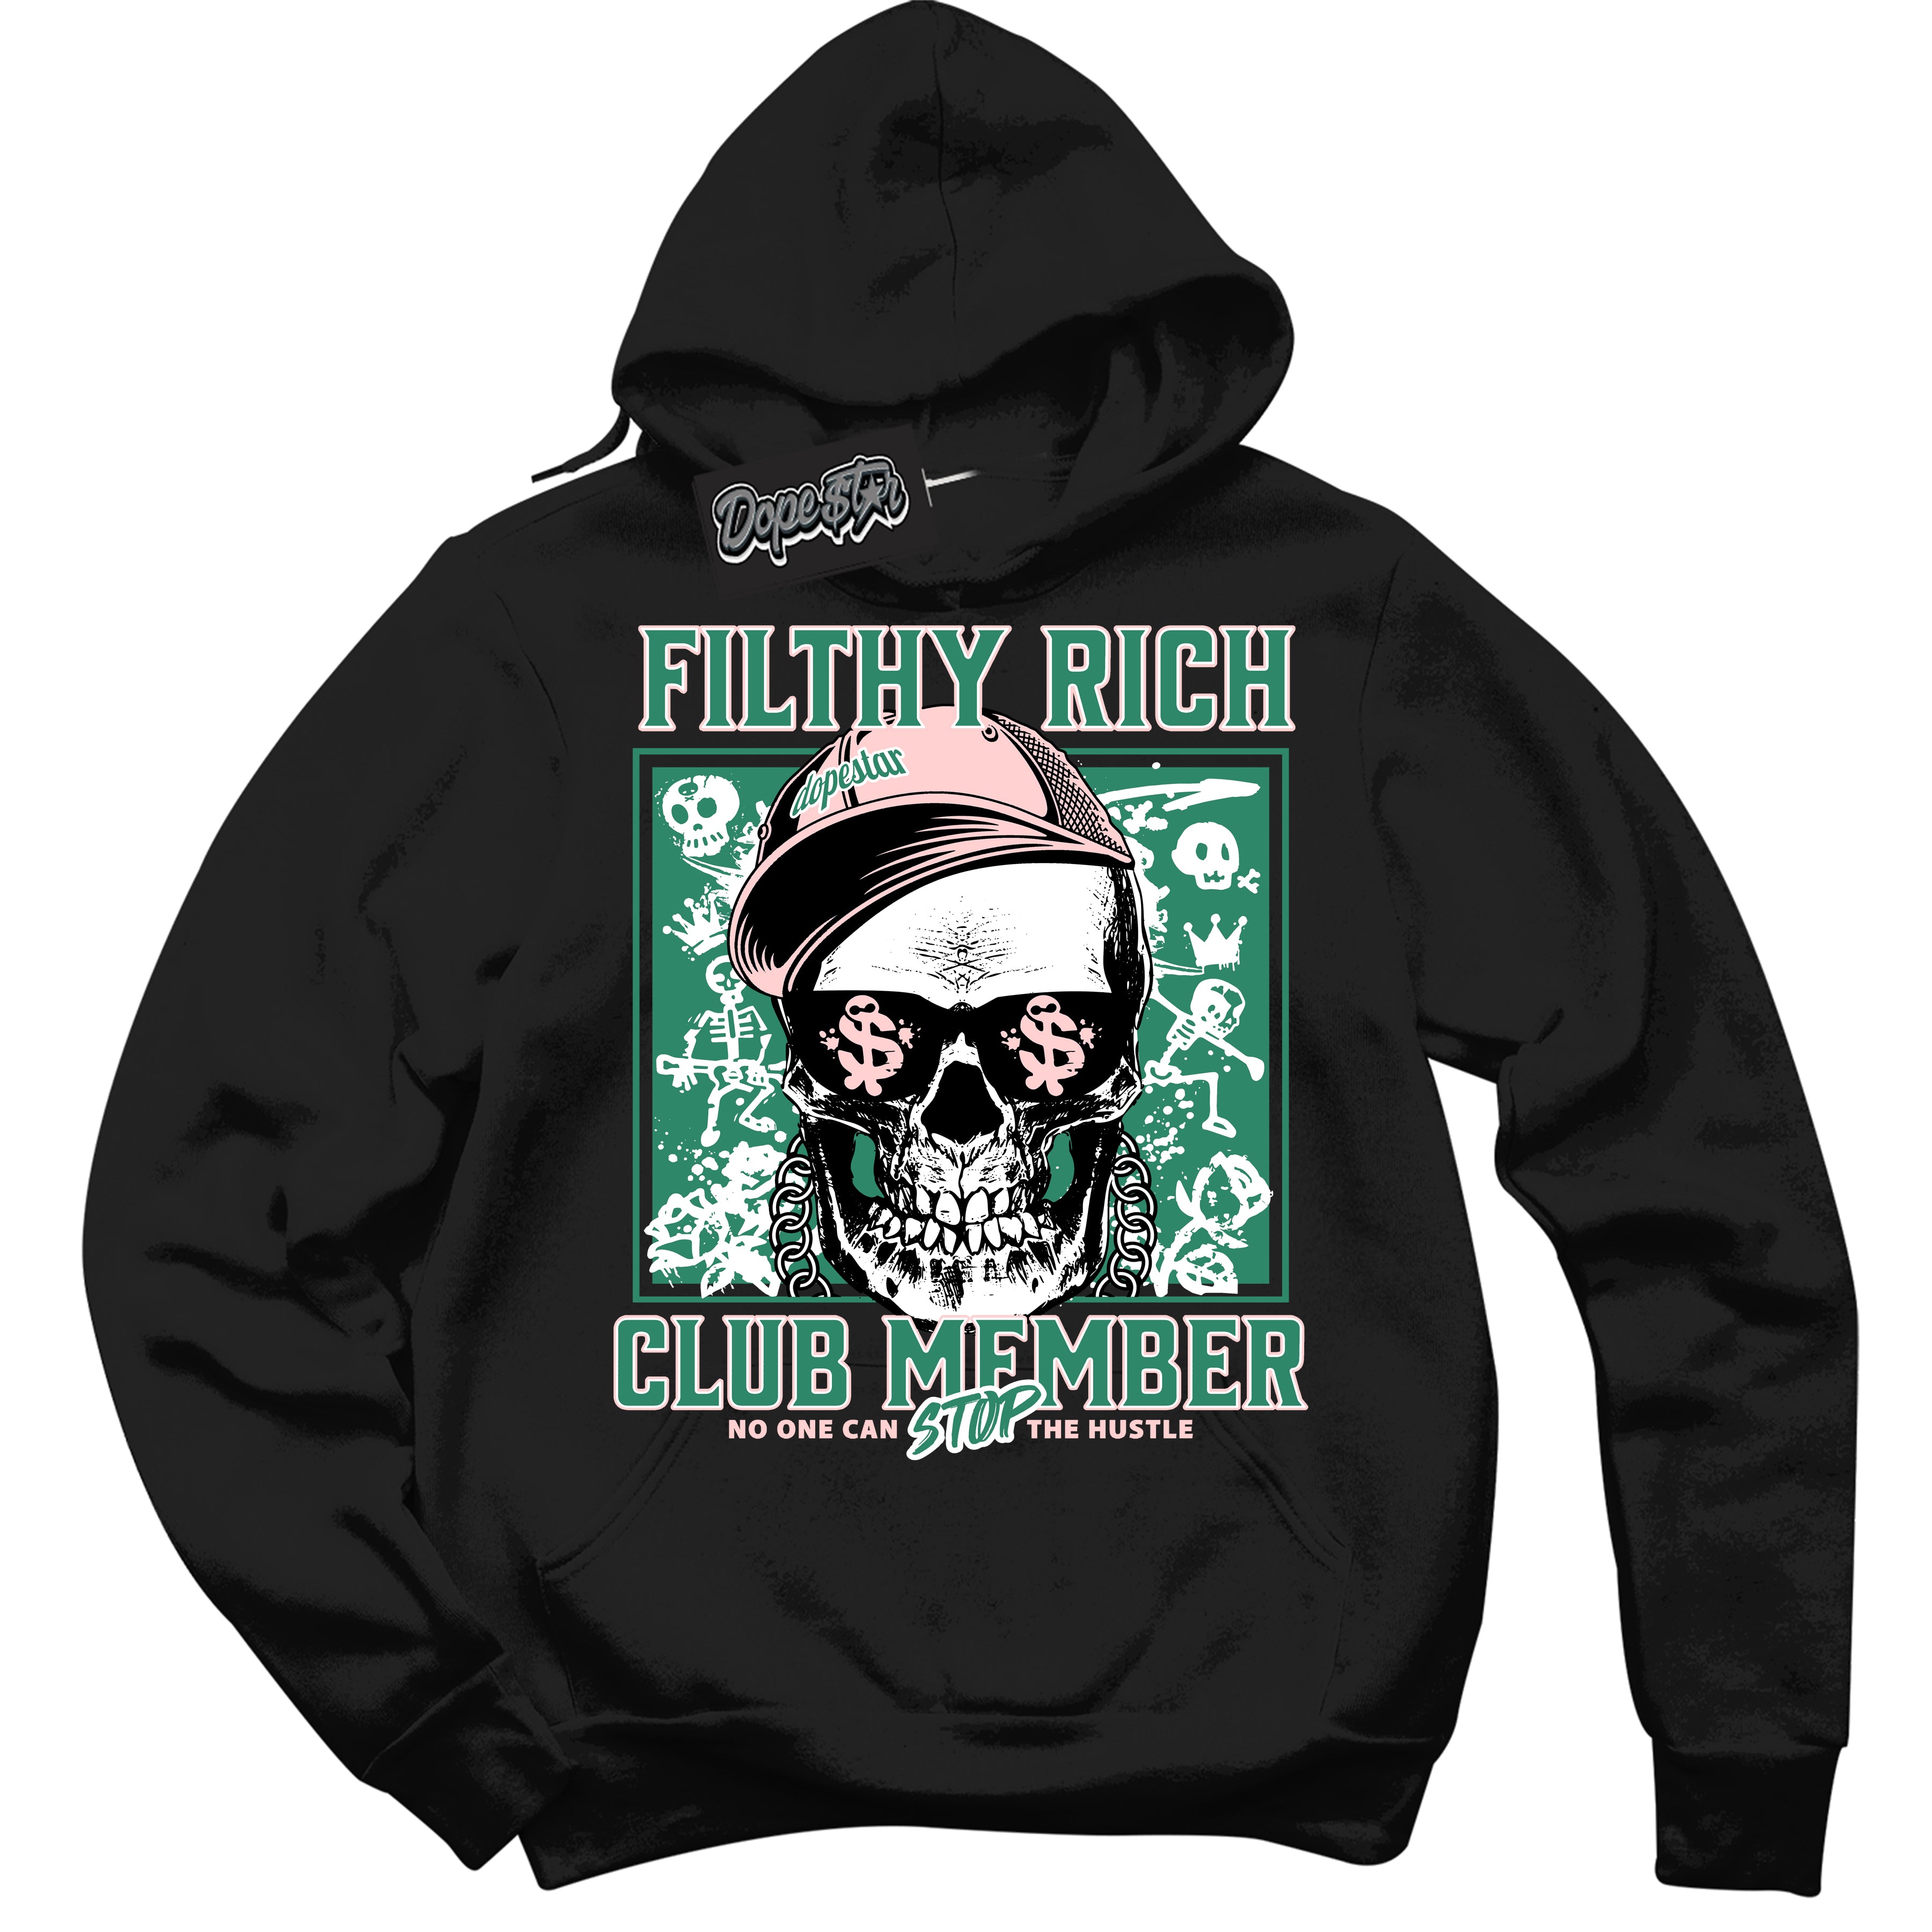 Cool Black Hoodie with “ Filthy Rich ”  design that Perfectly Matches Malachite Dunk Sneakers.